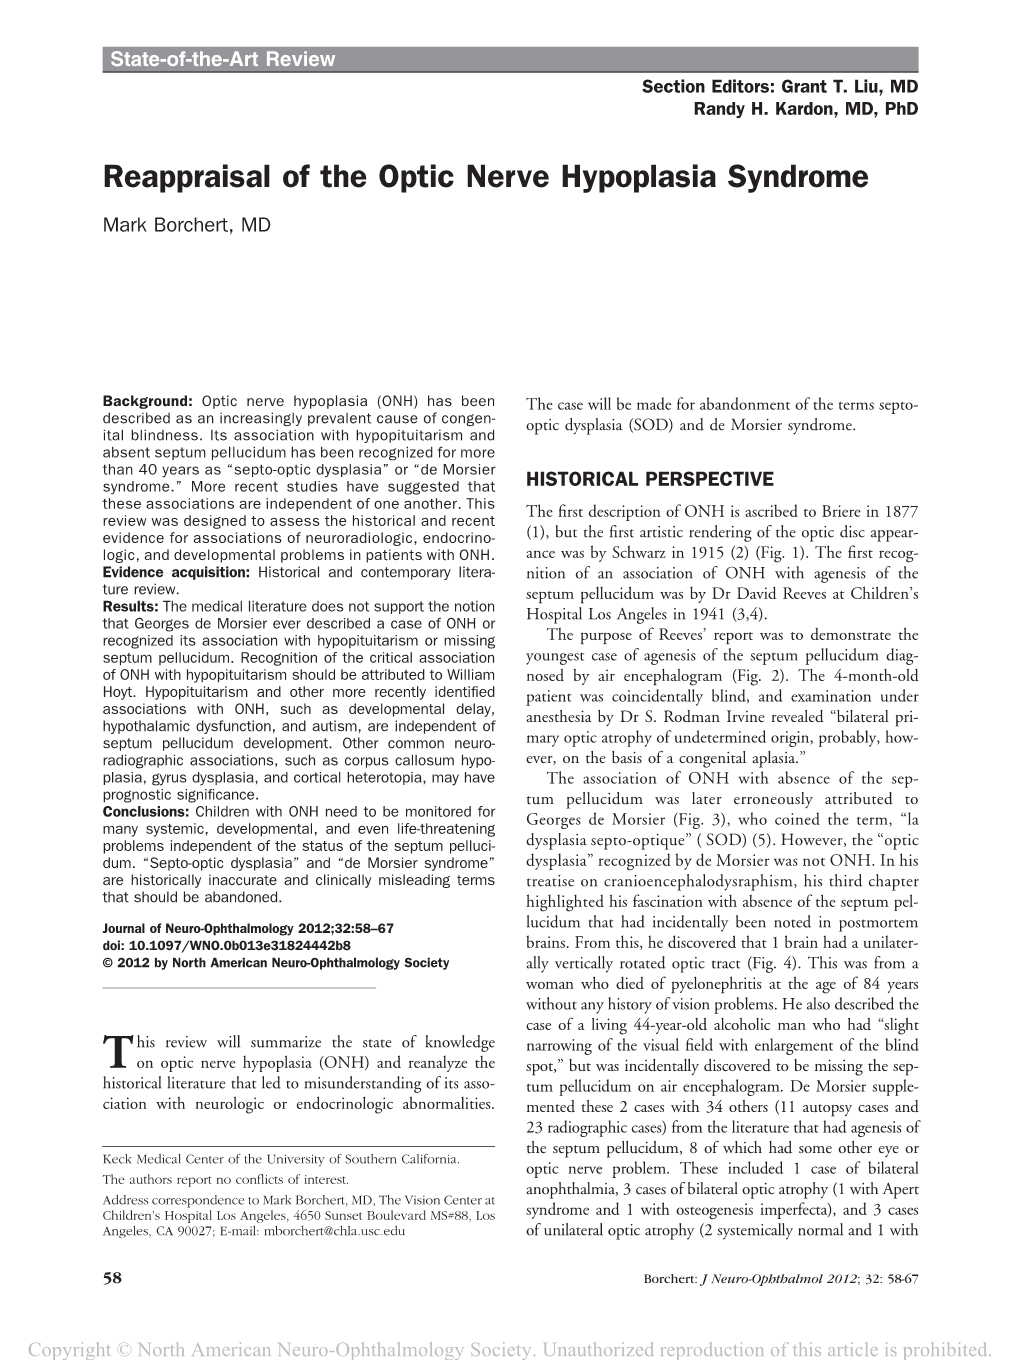 Reappraisal of the Optic Nerve Hypoplasia Syndrome